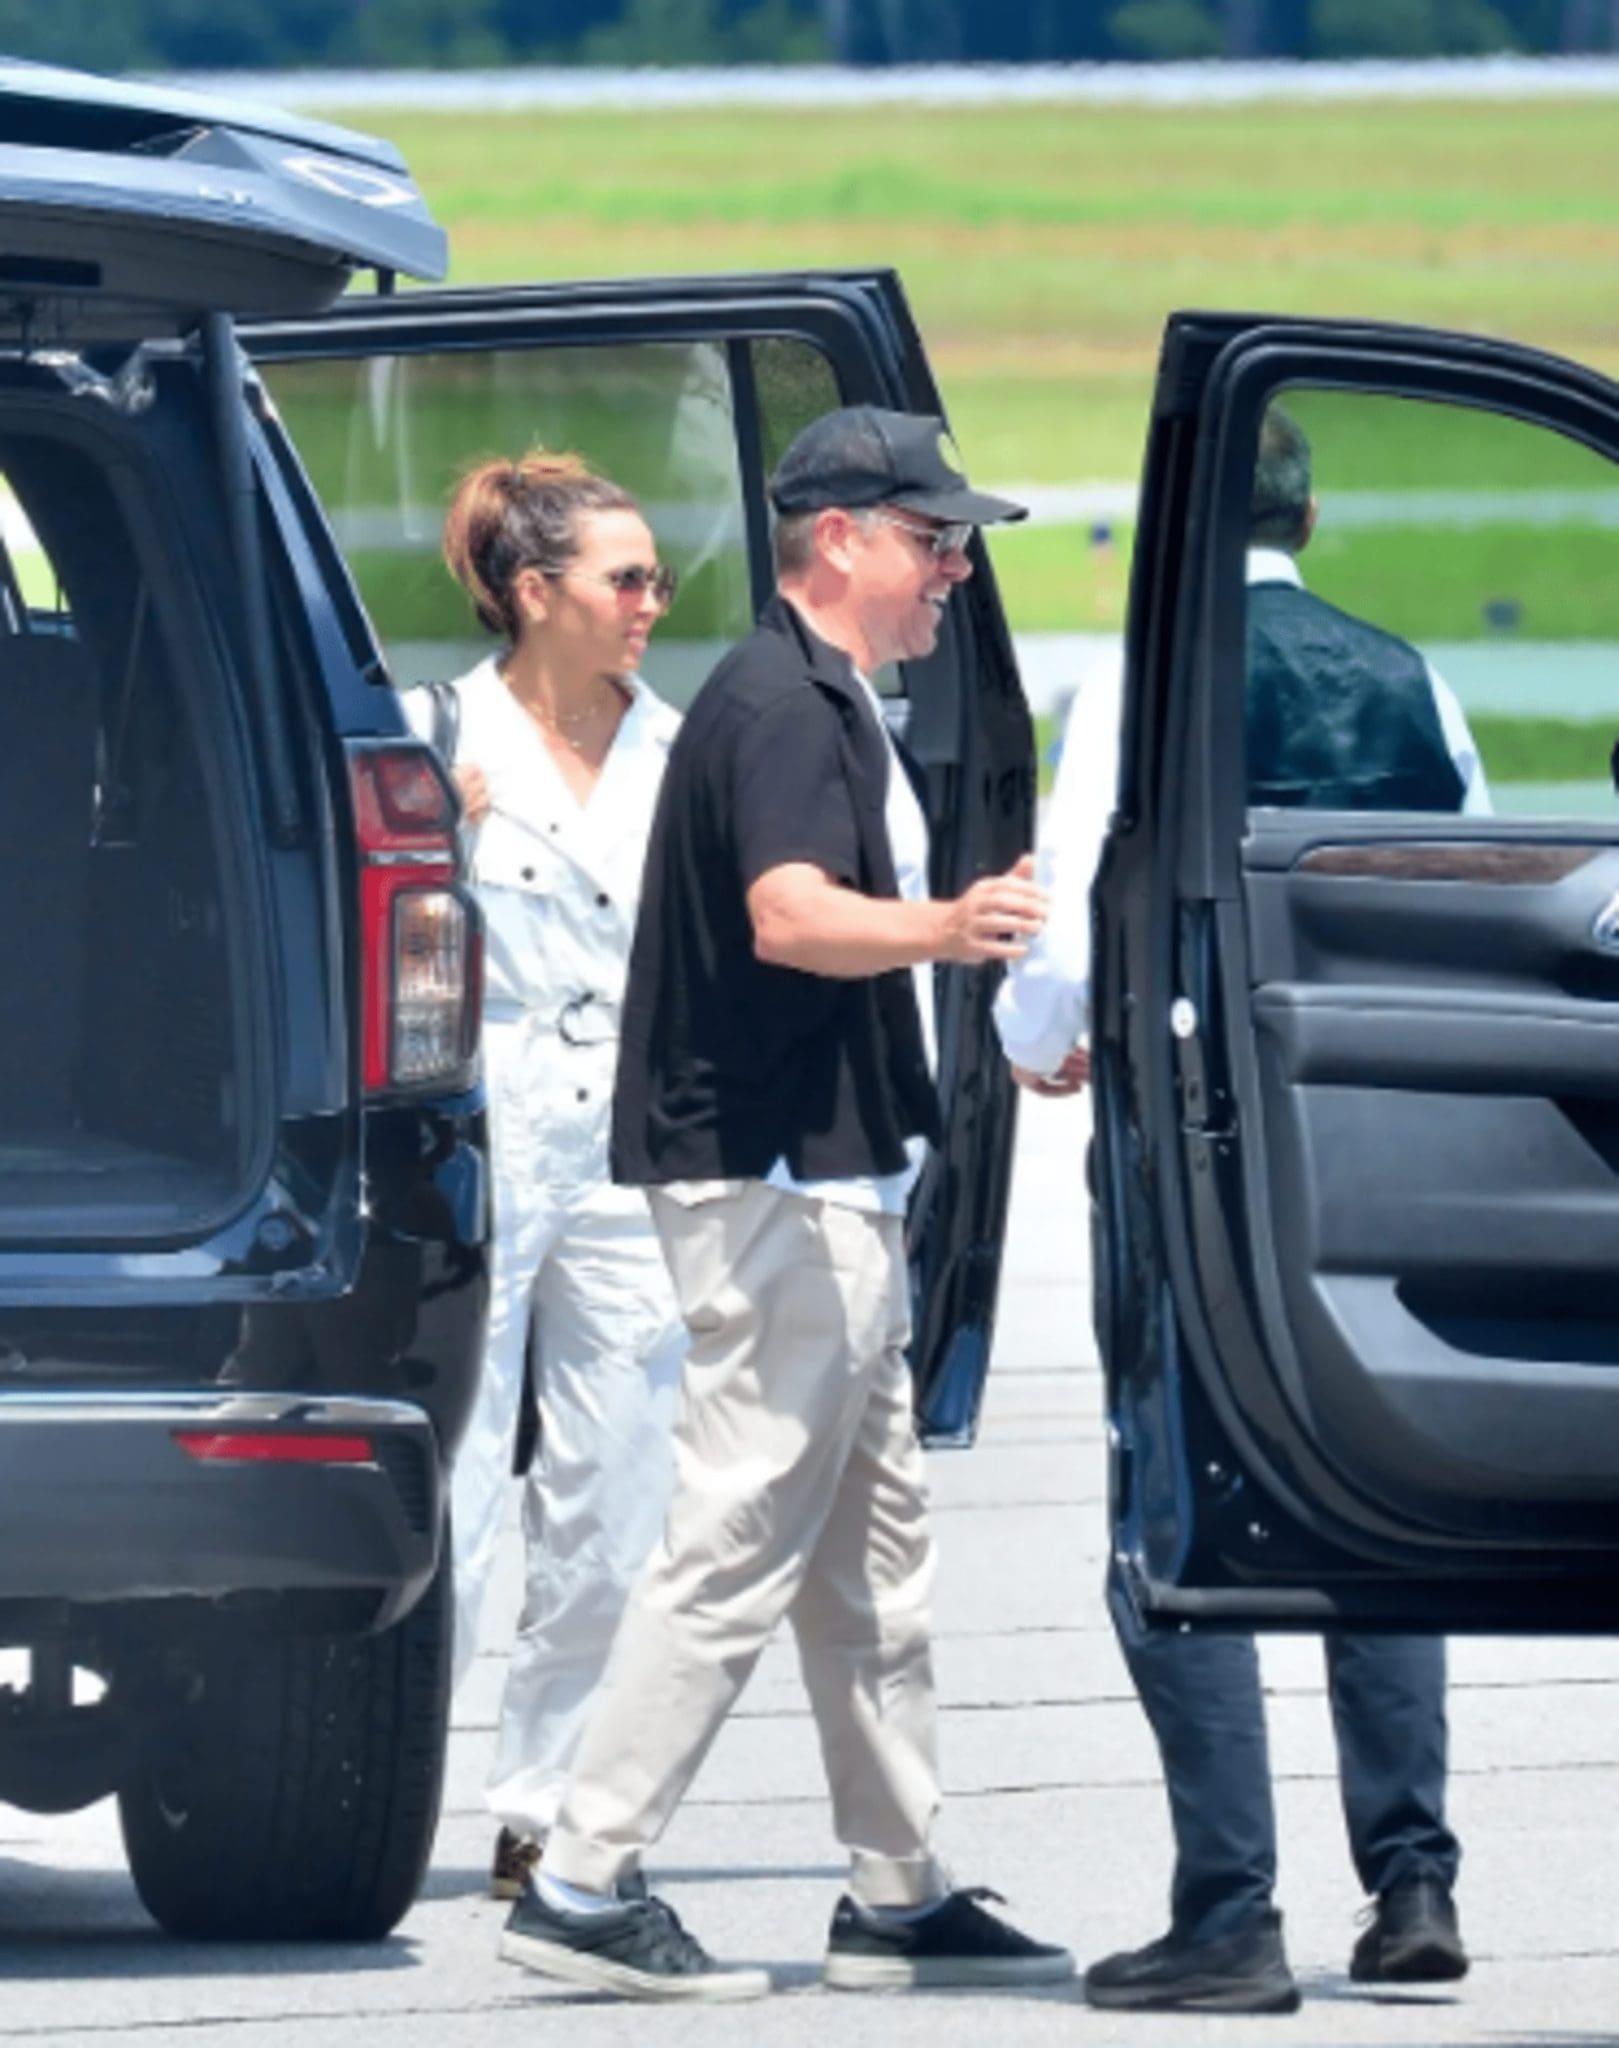 In Order To Attend The Wedding Of Ben Affleck And Jennifer Lopez, Matt Damon And His Wife Luciana Barroso Traveled To Georgia